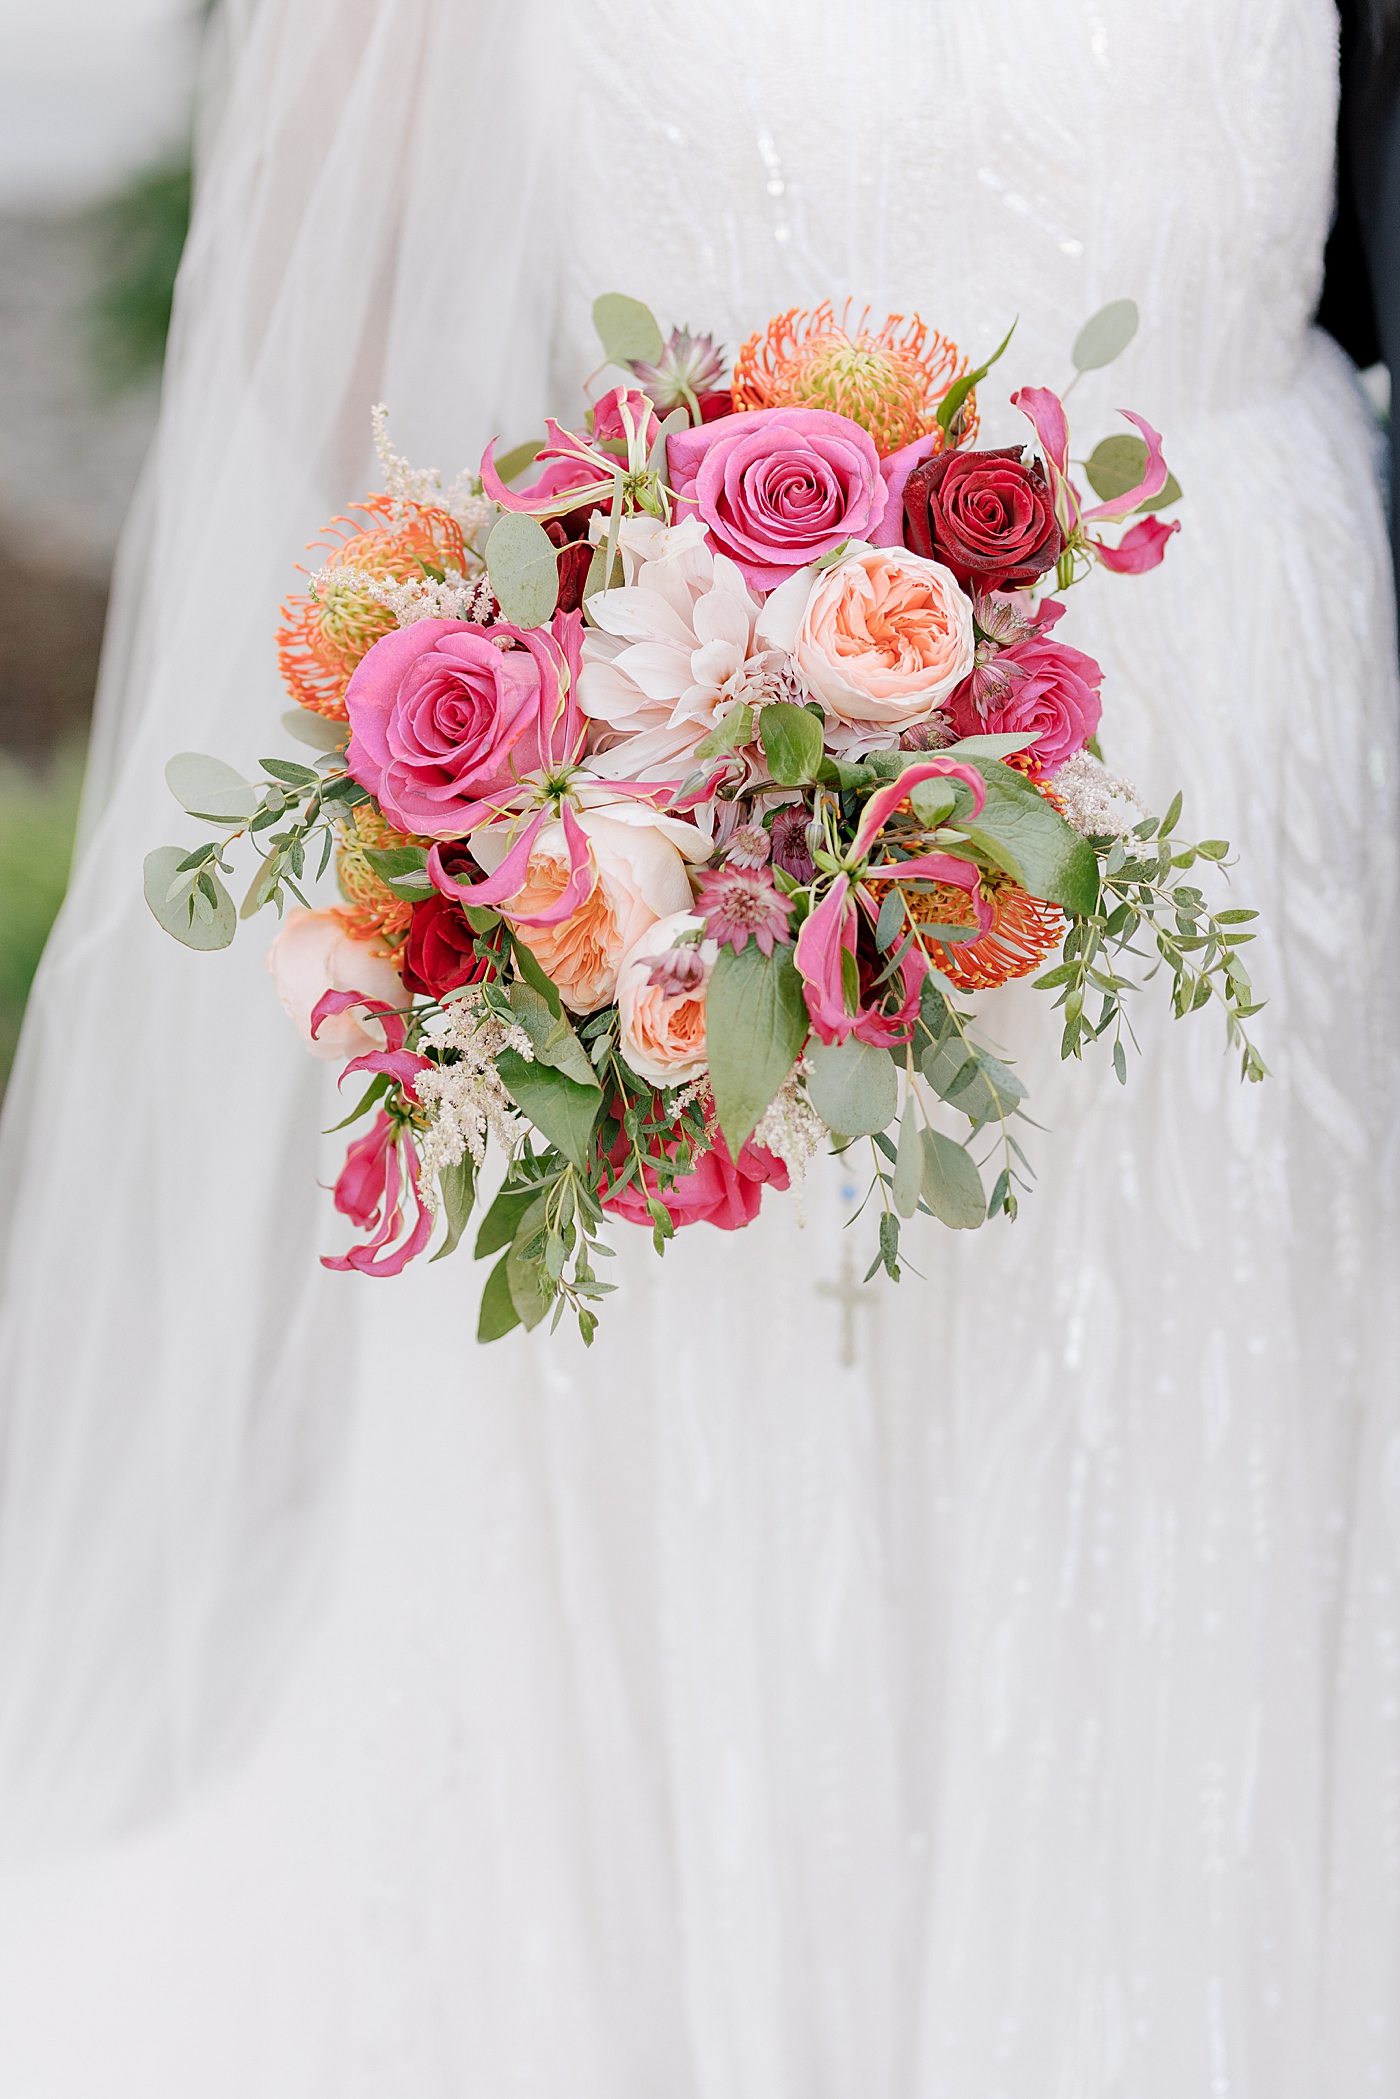 Close up of a colorful pink, orange, and red bridal bouquet | Image by Hope Helmuth Photography